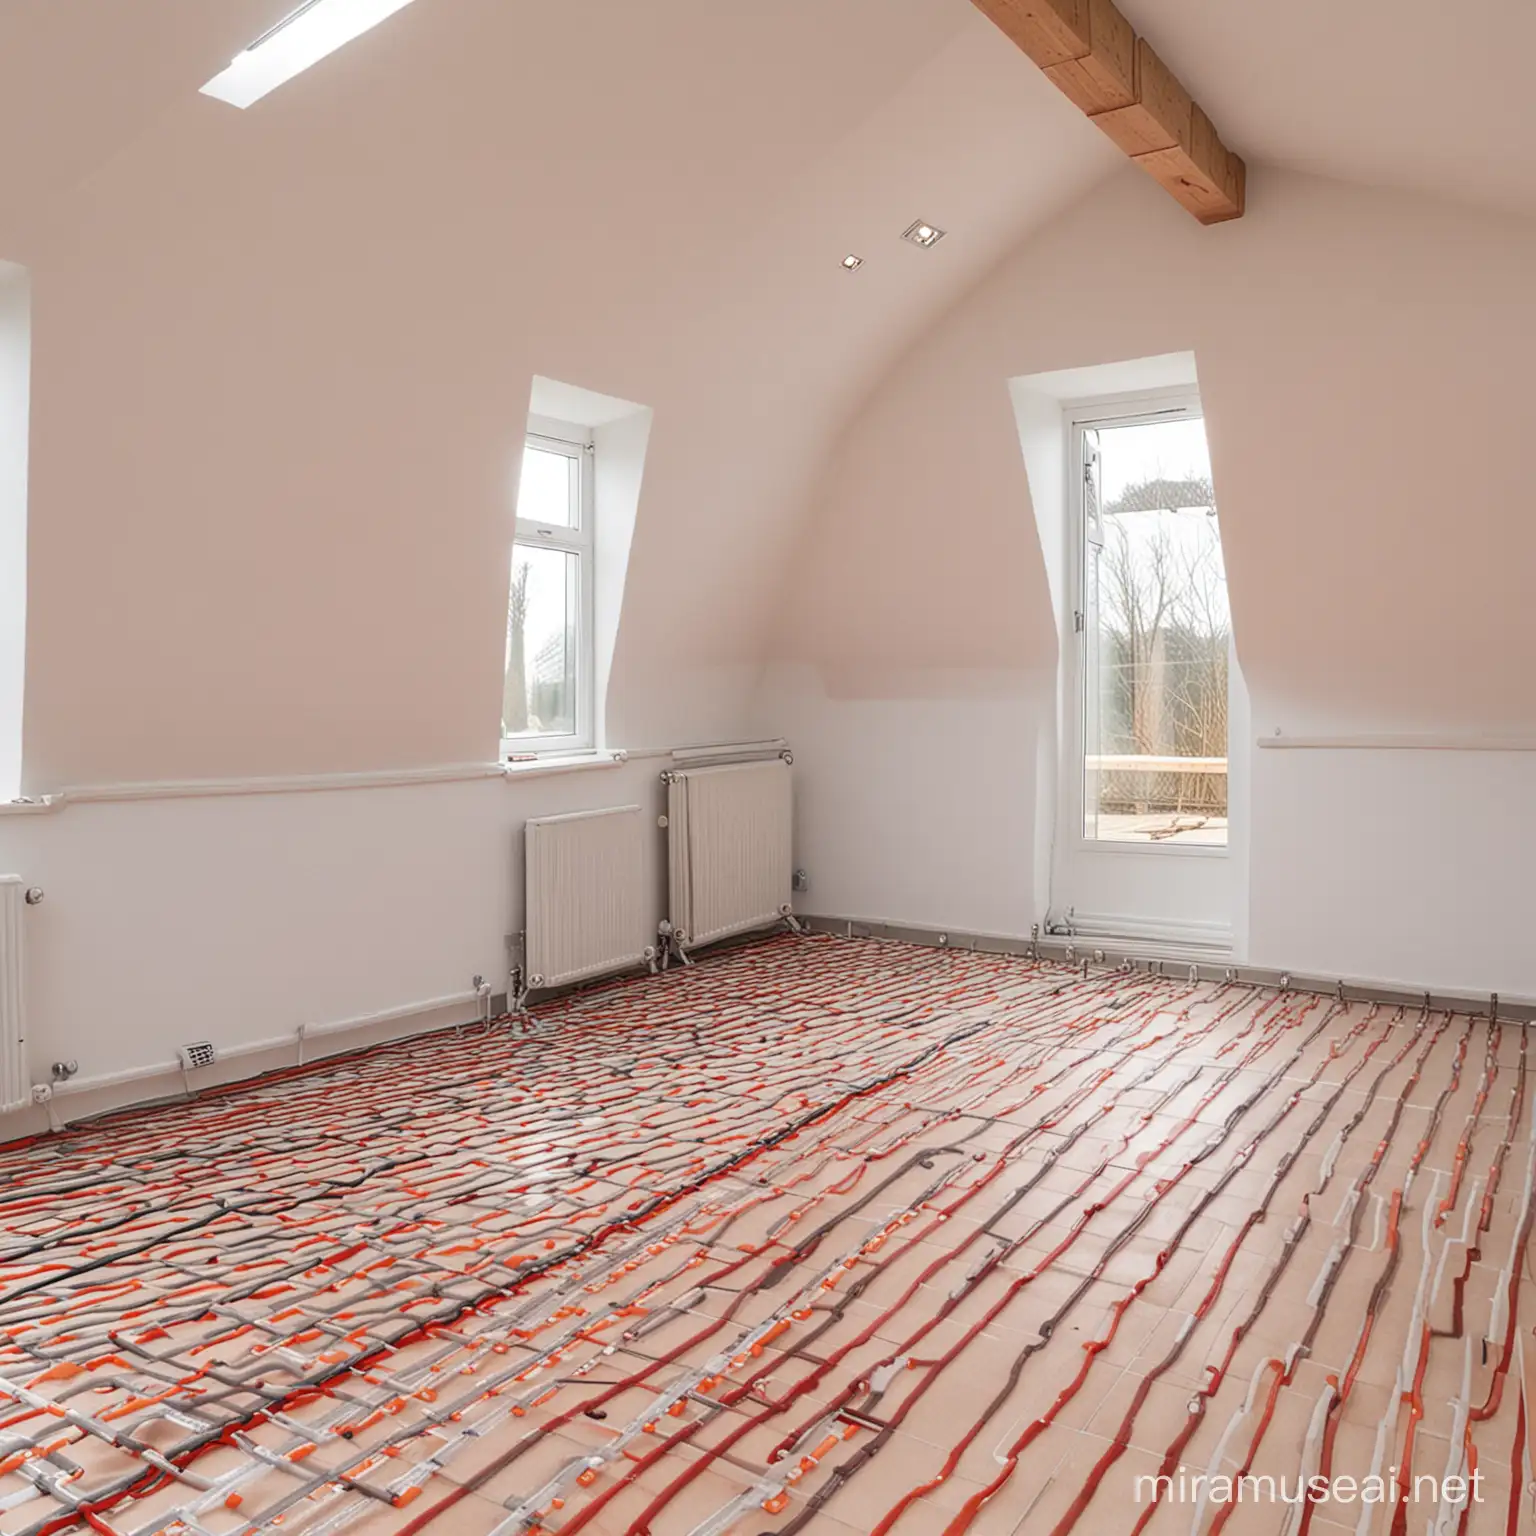 A house heated with underfloor heating system